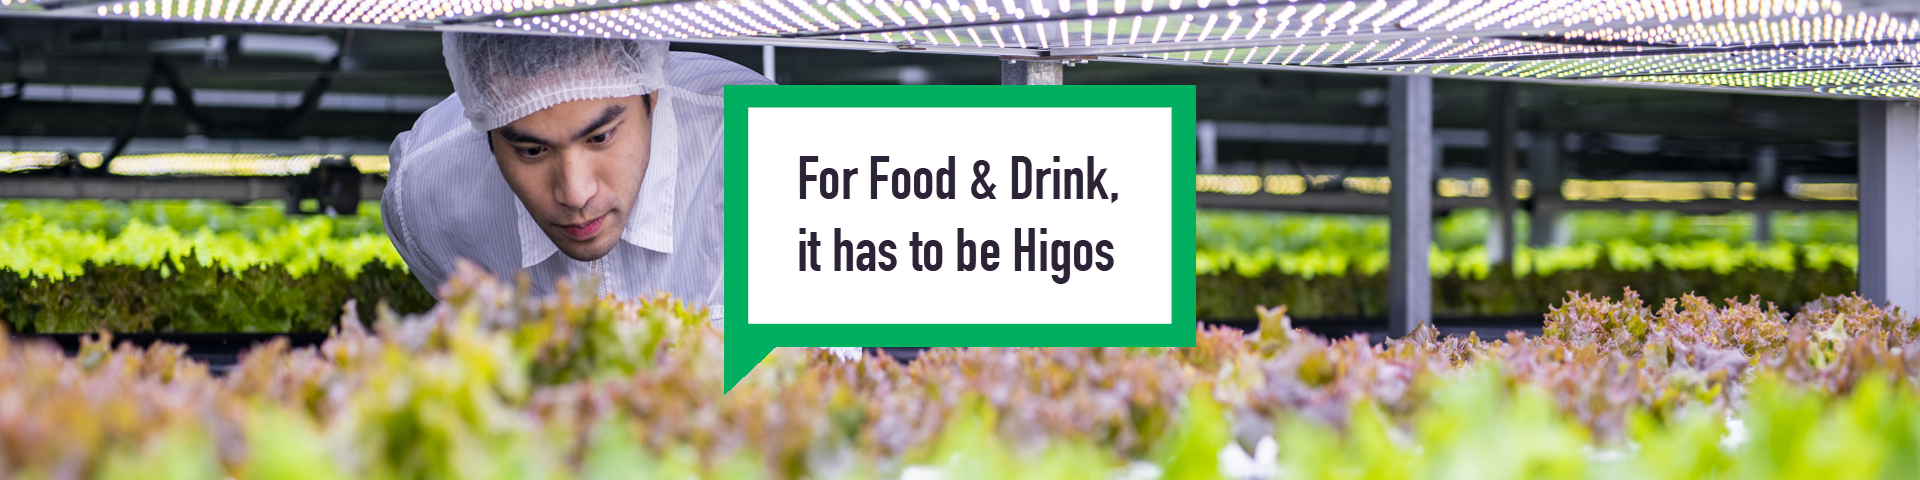 Higos Commercial insurance food & drink